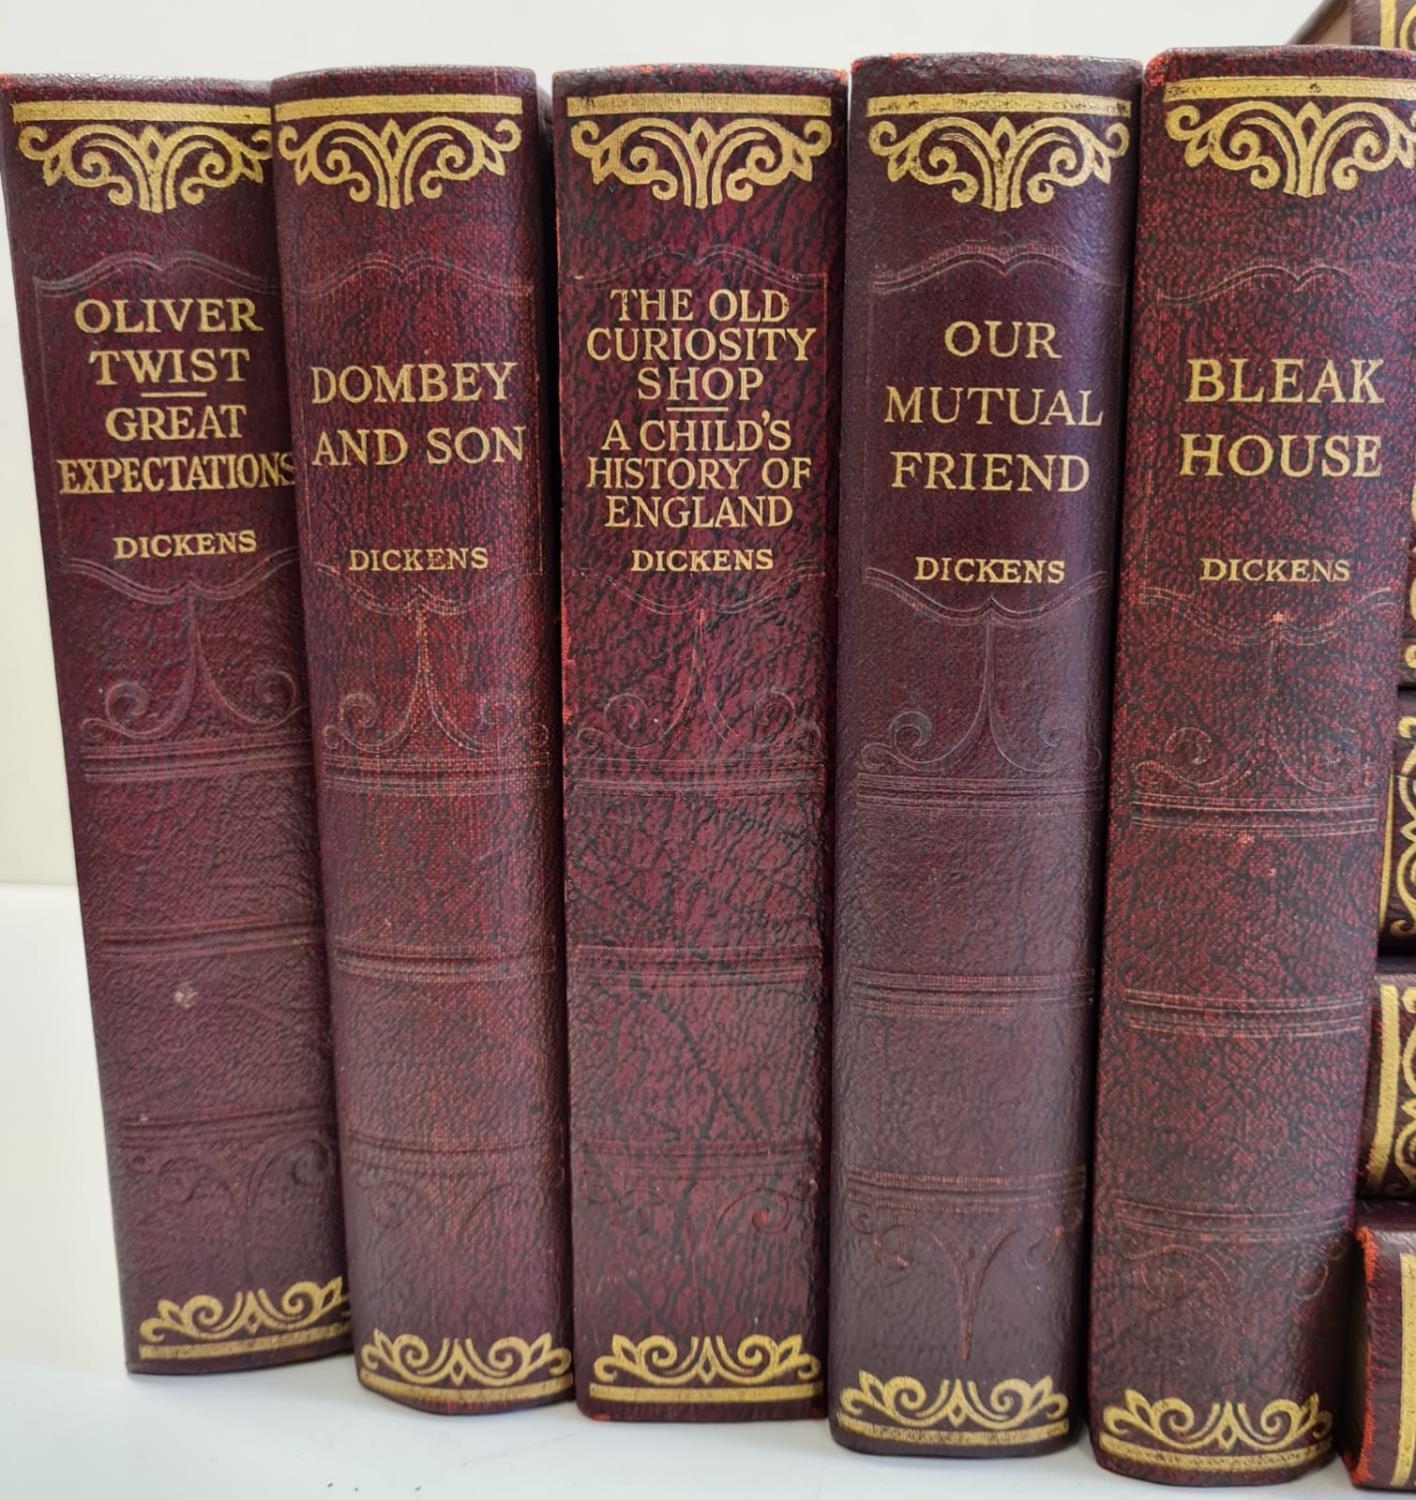 A completed work of Charles Dickens (16 volumes) illustrated by Phiz circa 1900s - Image 2 of 5